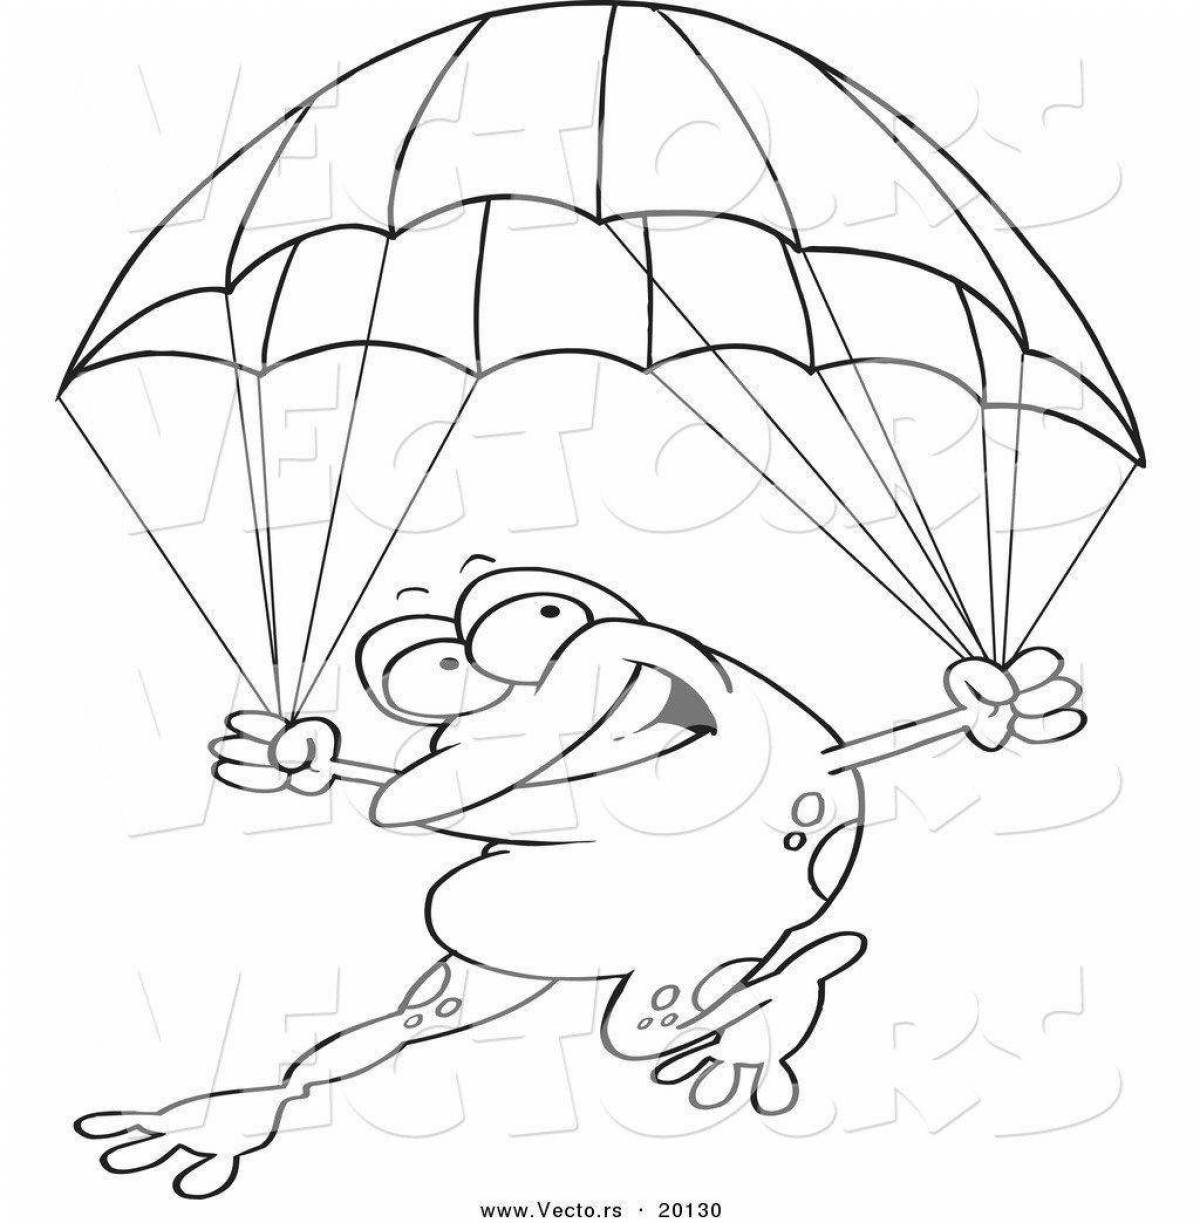 Vibrant skydiver coloring page for kids